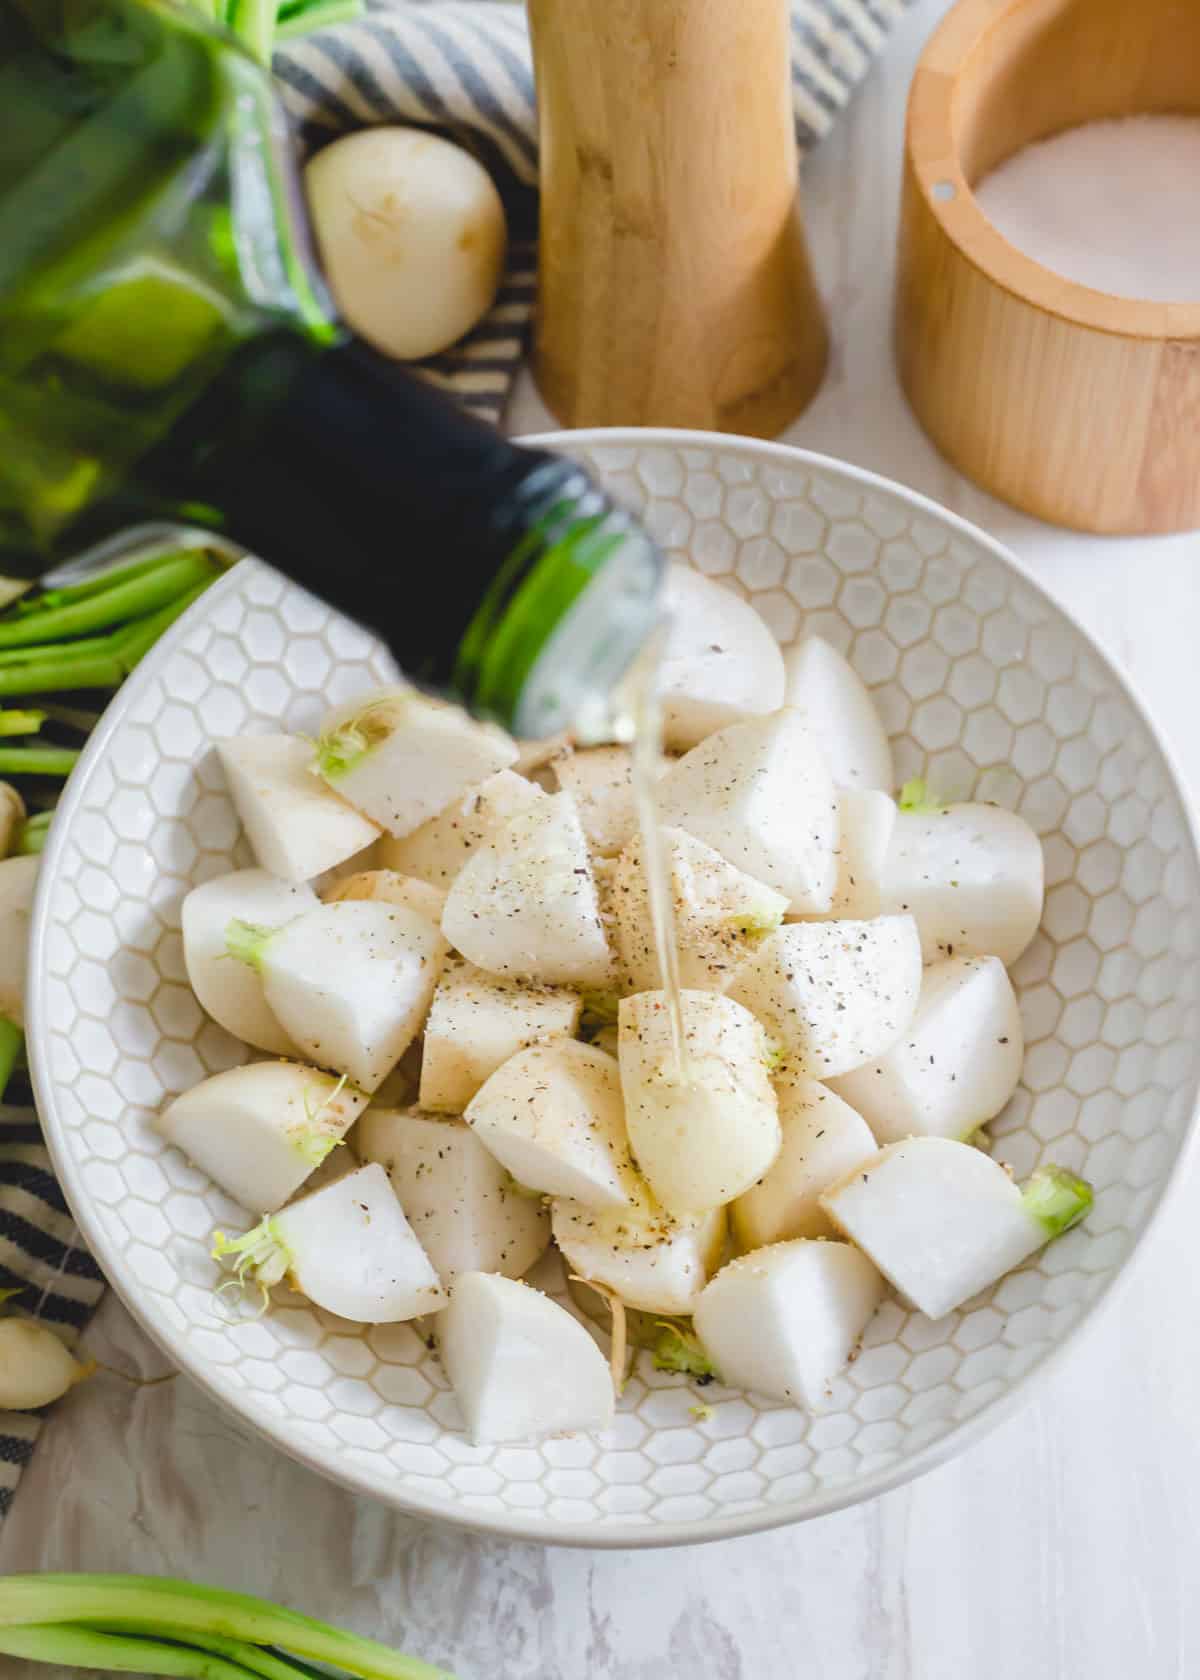 Chopped Japanese turnips with olive oil, salt and pepper in a bowl.